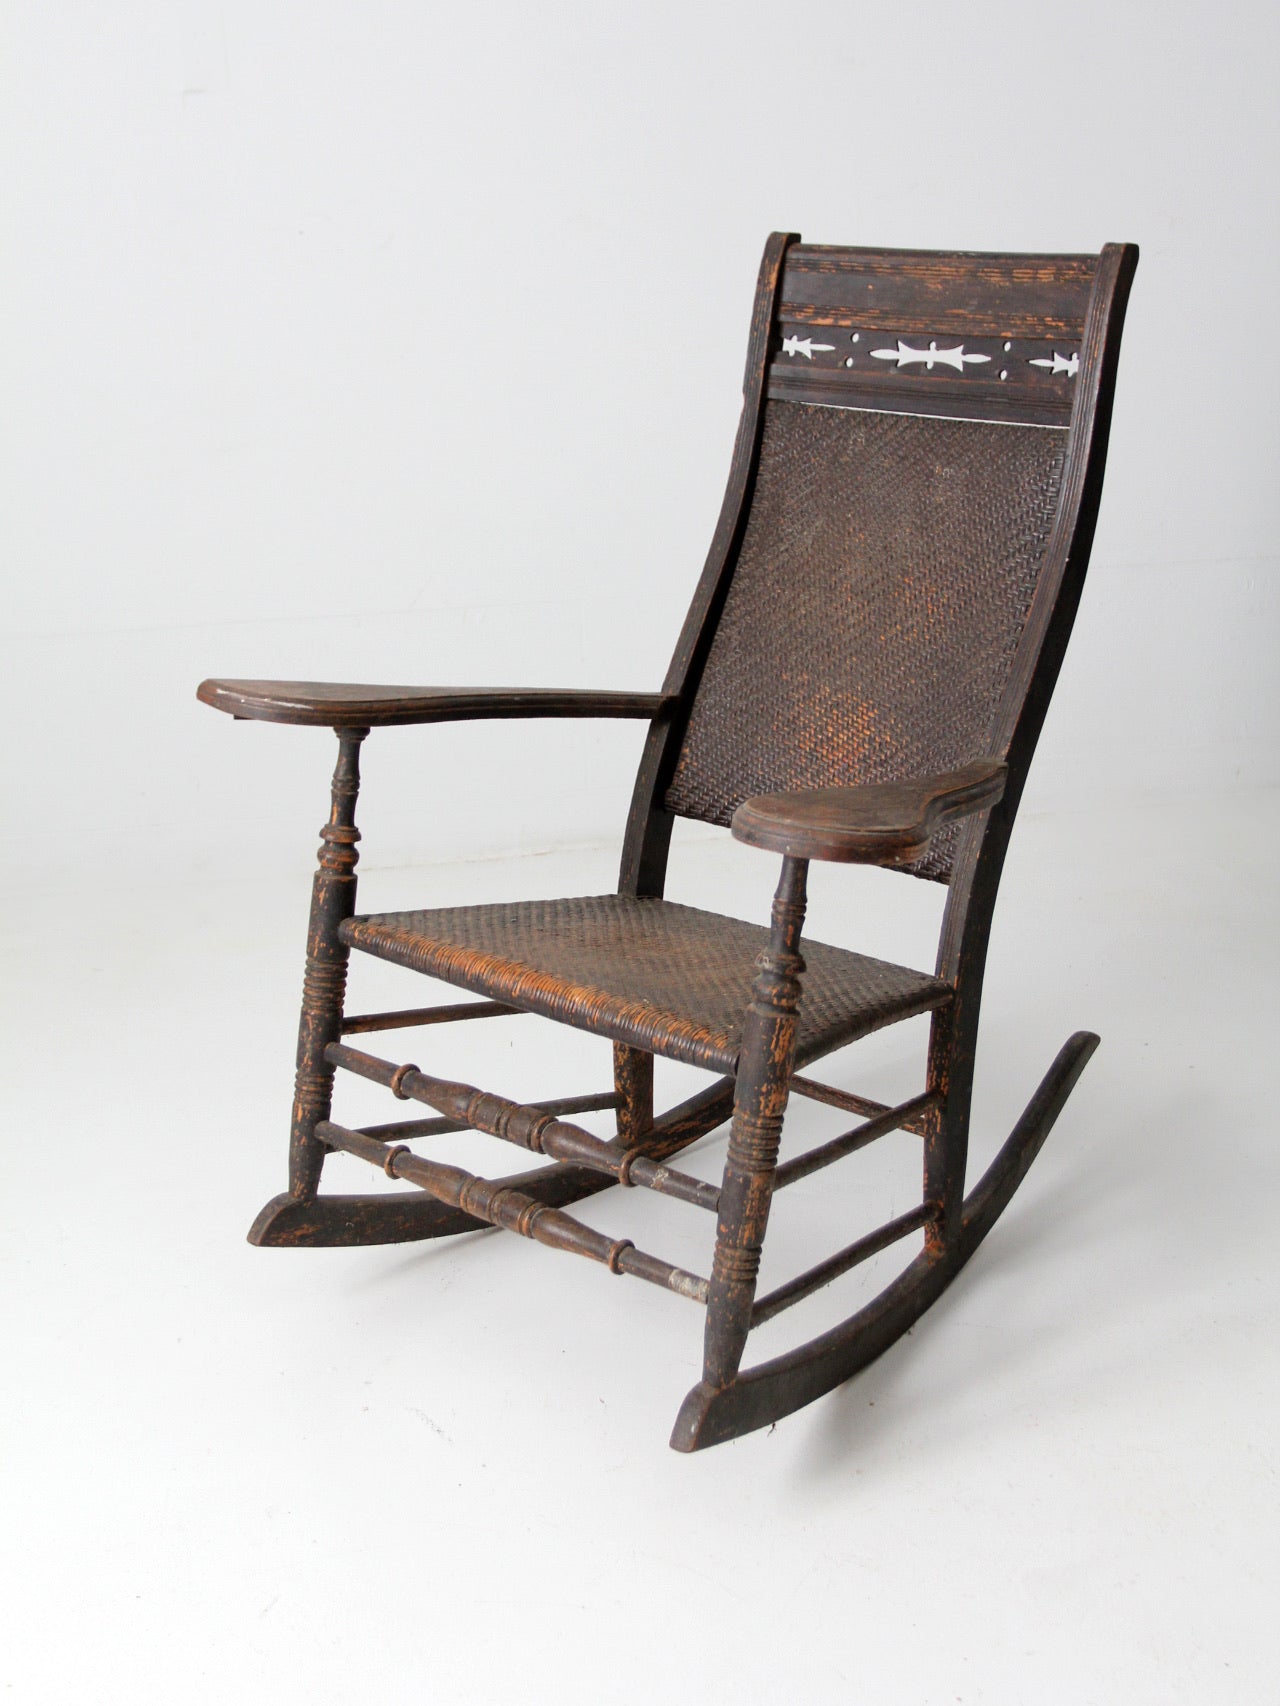 antique American rustic rocking chair